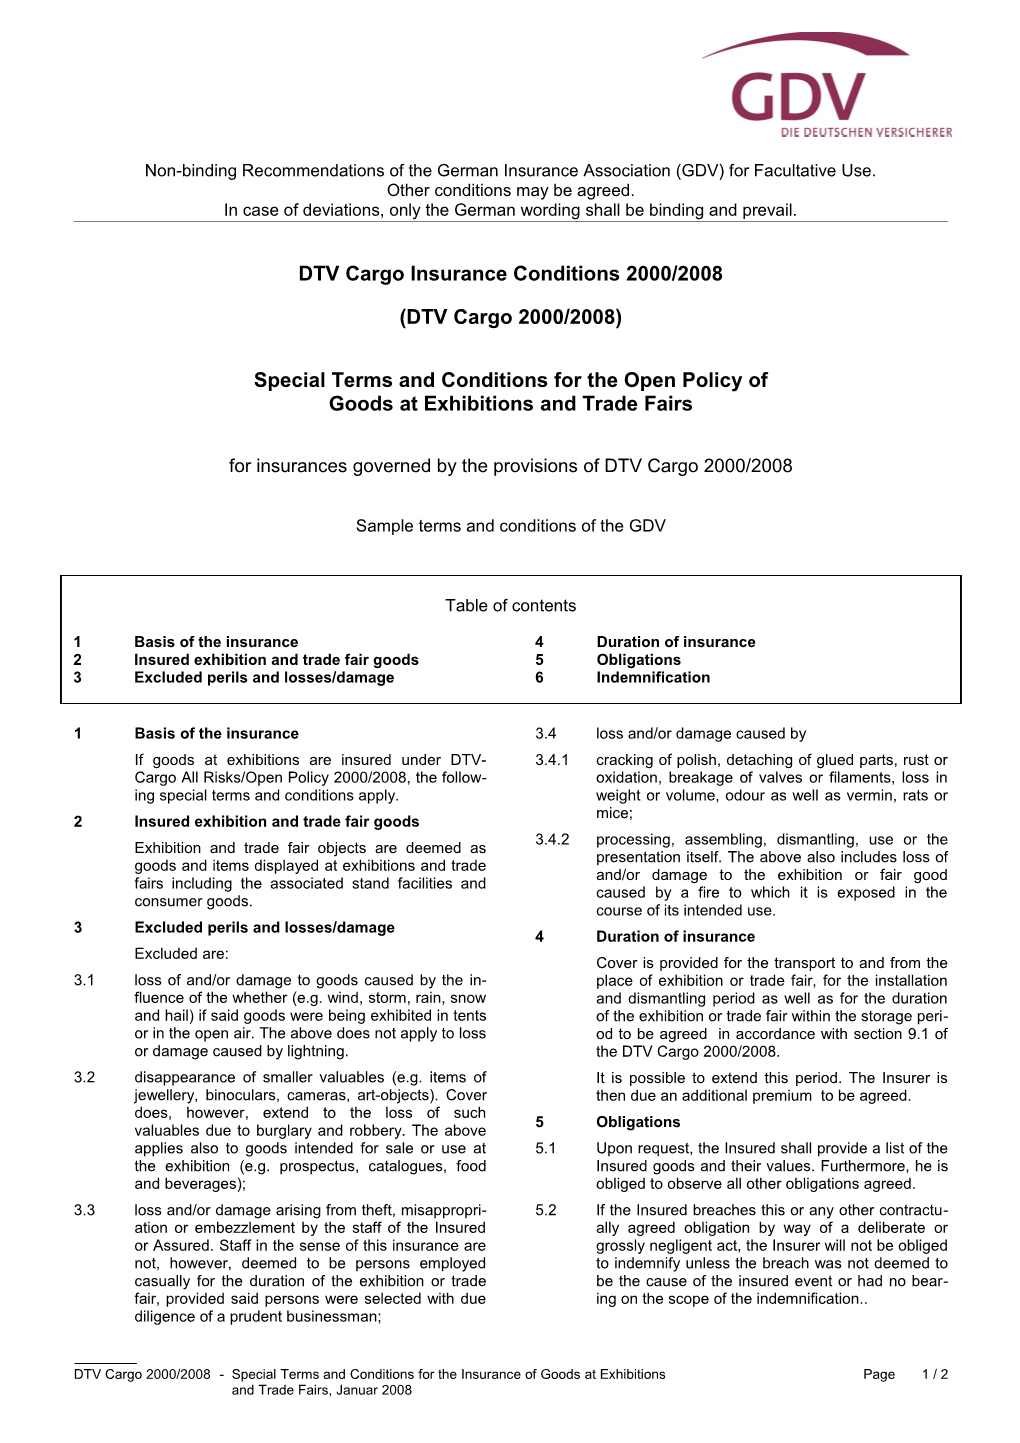 DTV Cargo Insurance Conditions 2000/2008